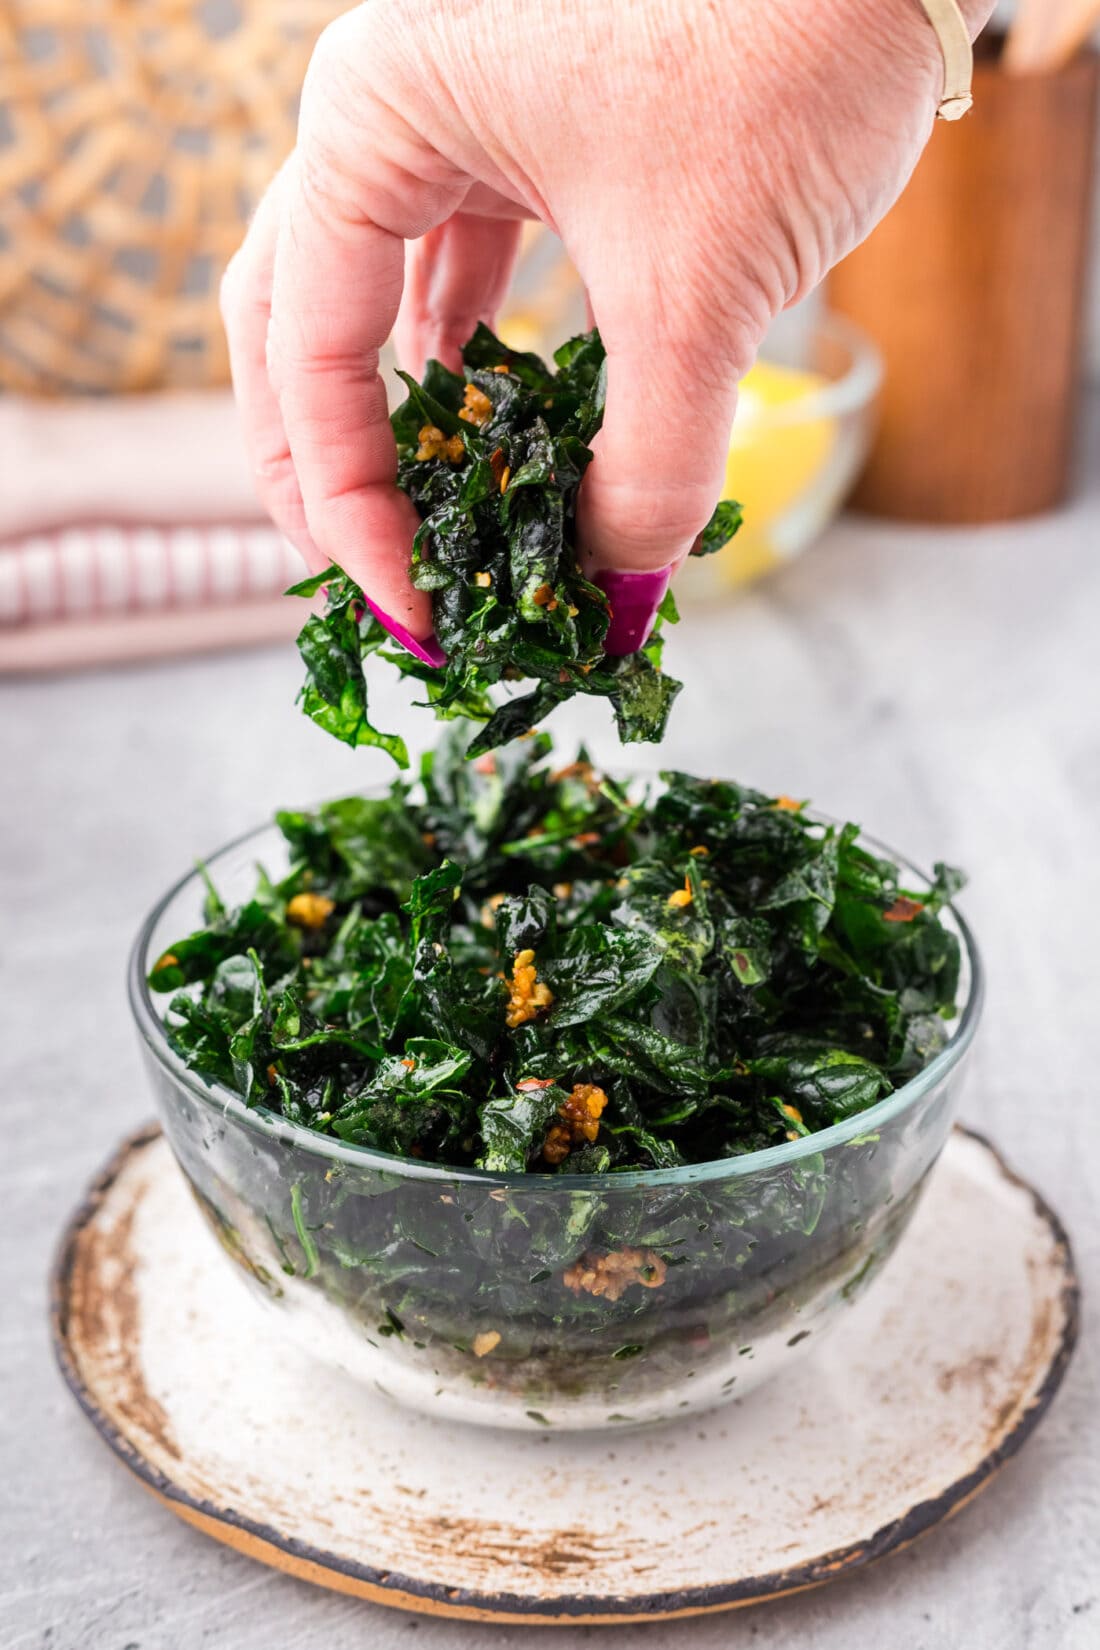 A hand grabbing Fried Spinach out of a bowl